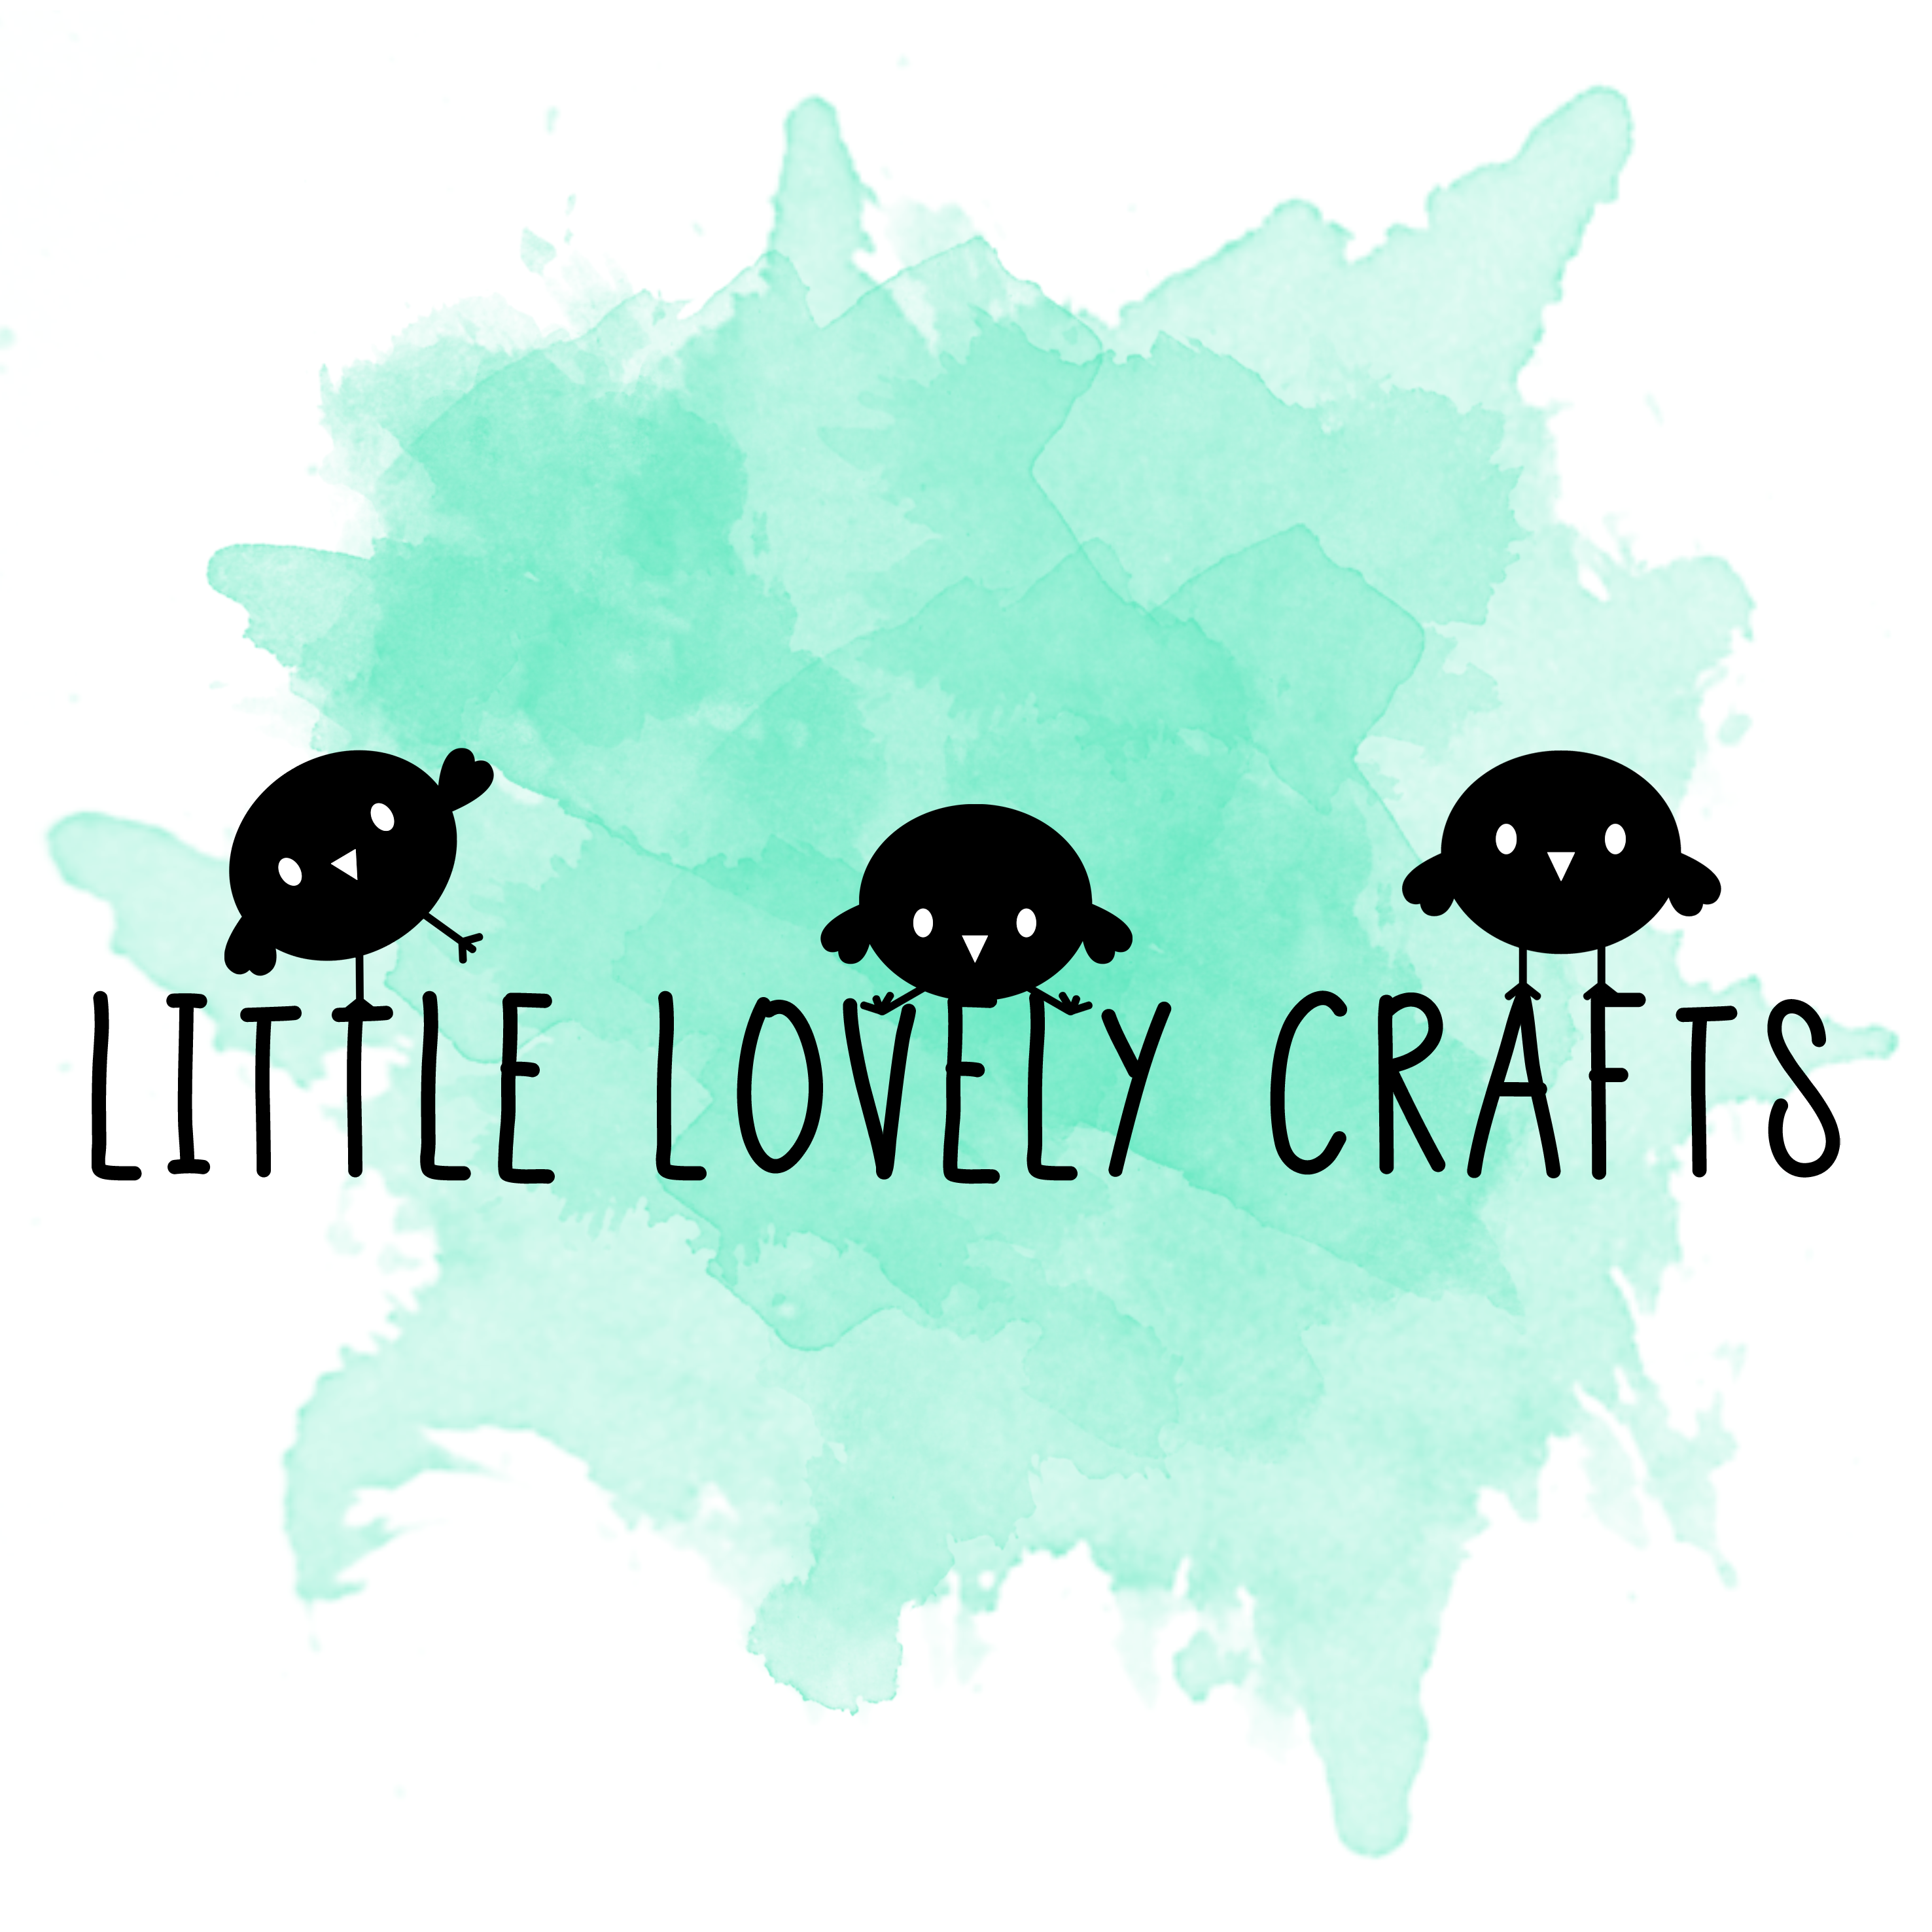 Little Lovely Crafts